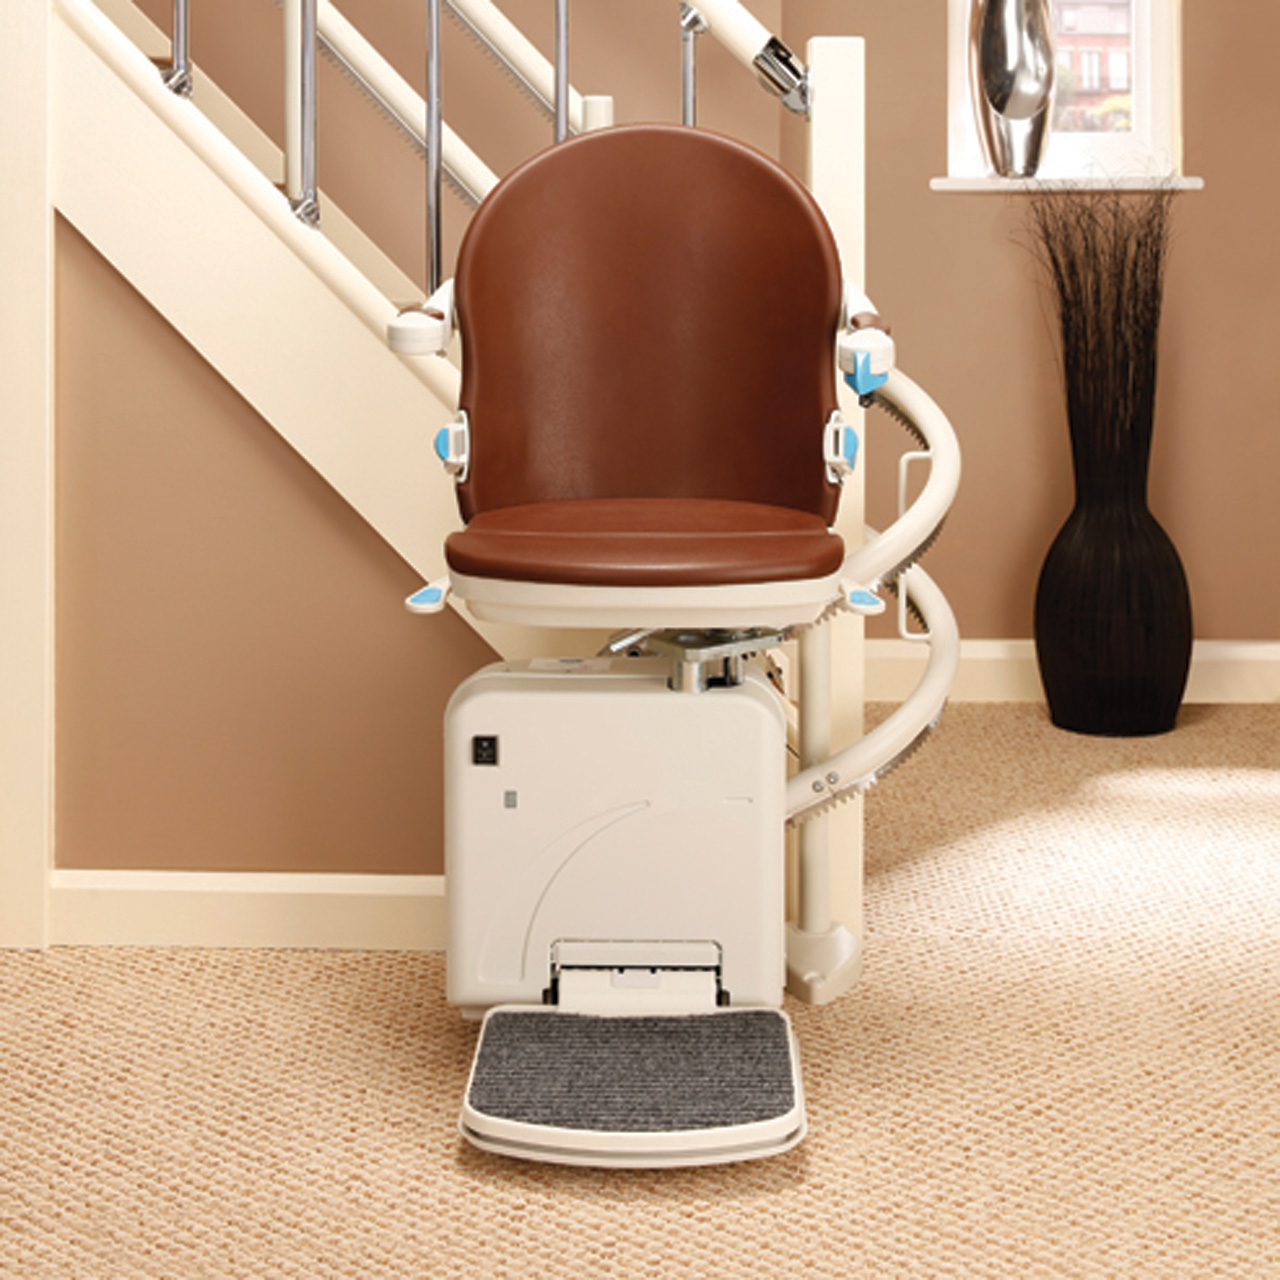 LA Curved stair charlift for elderly